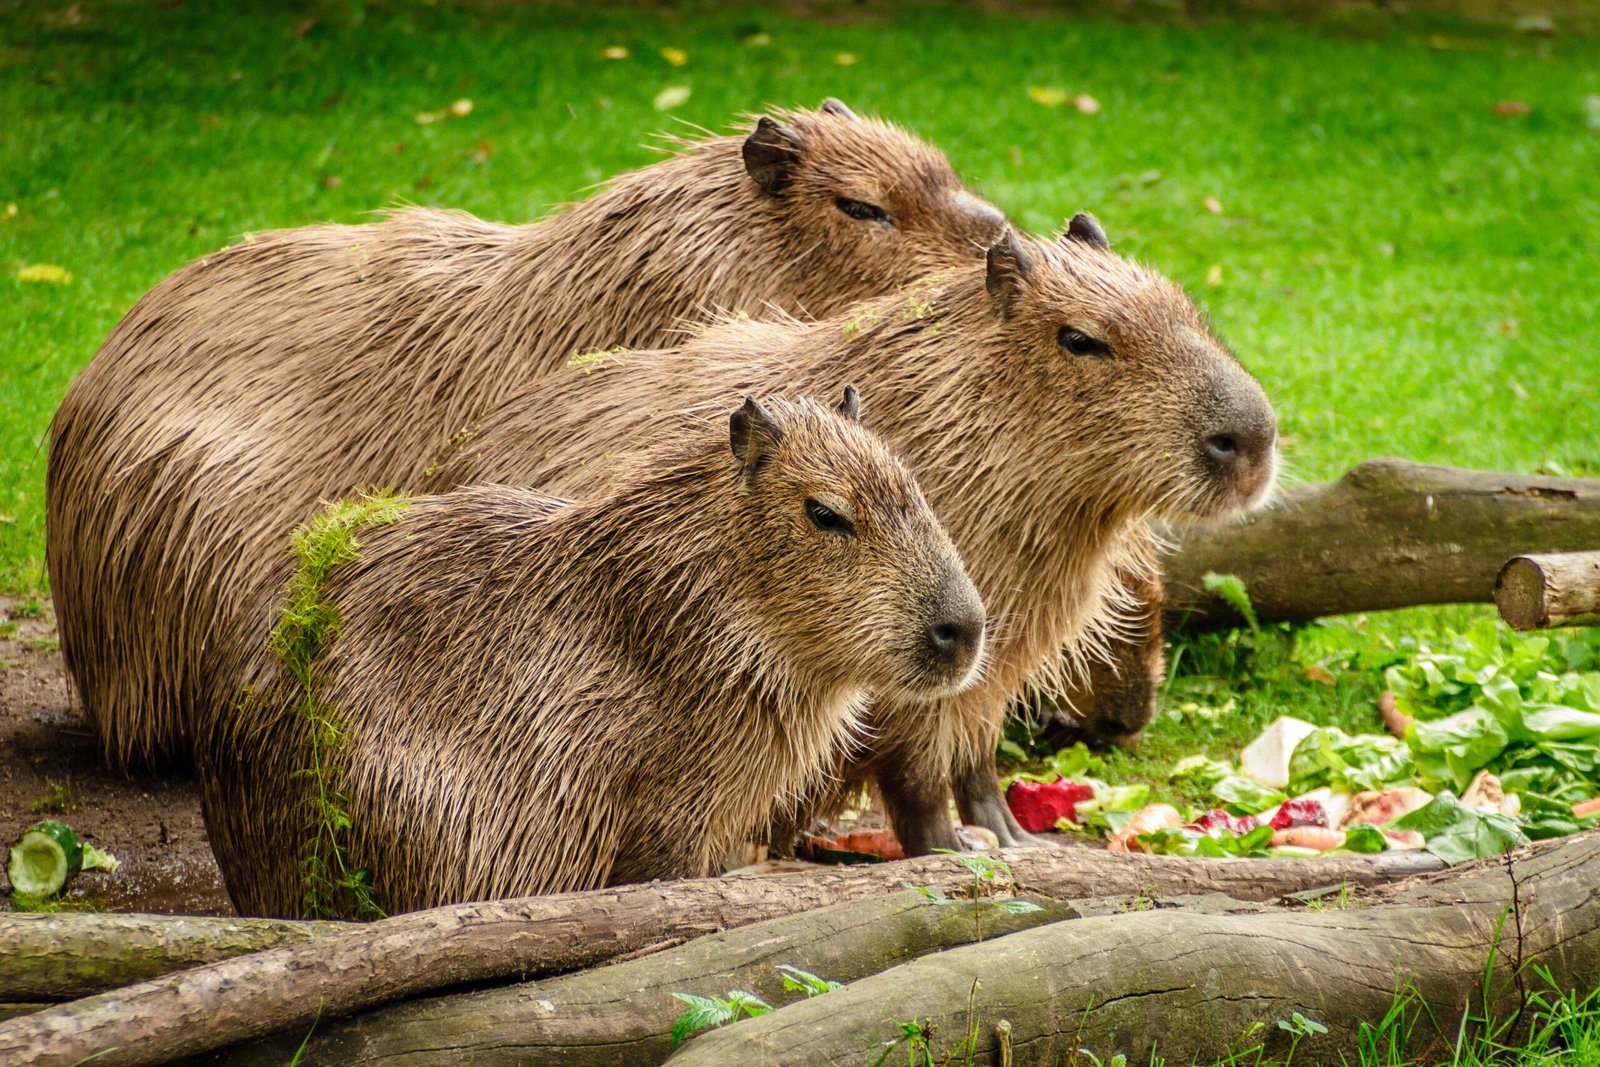 How to Care for a Capybara as a Pet